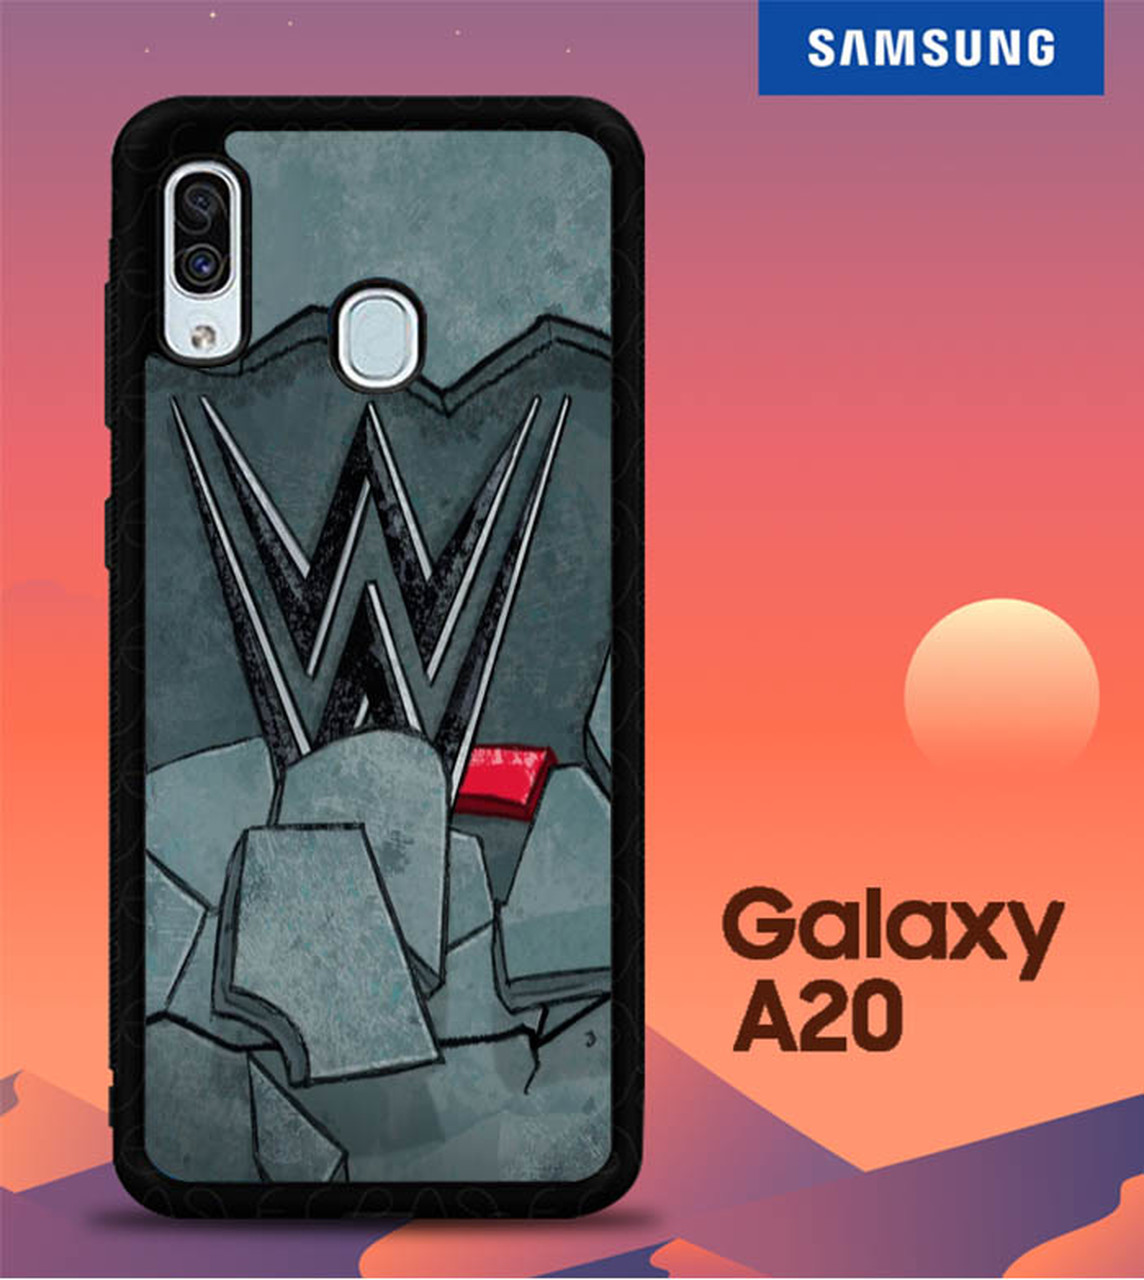 WWE wallpapers X9008 Samsung Galaxy A20 Case   Flazzy Store